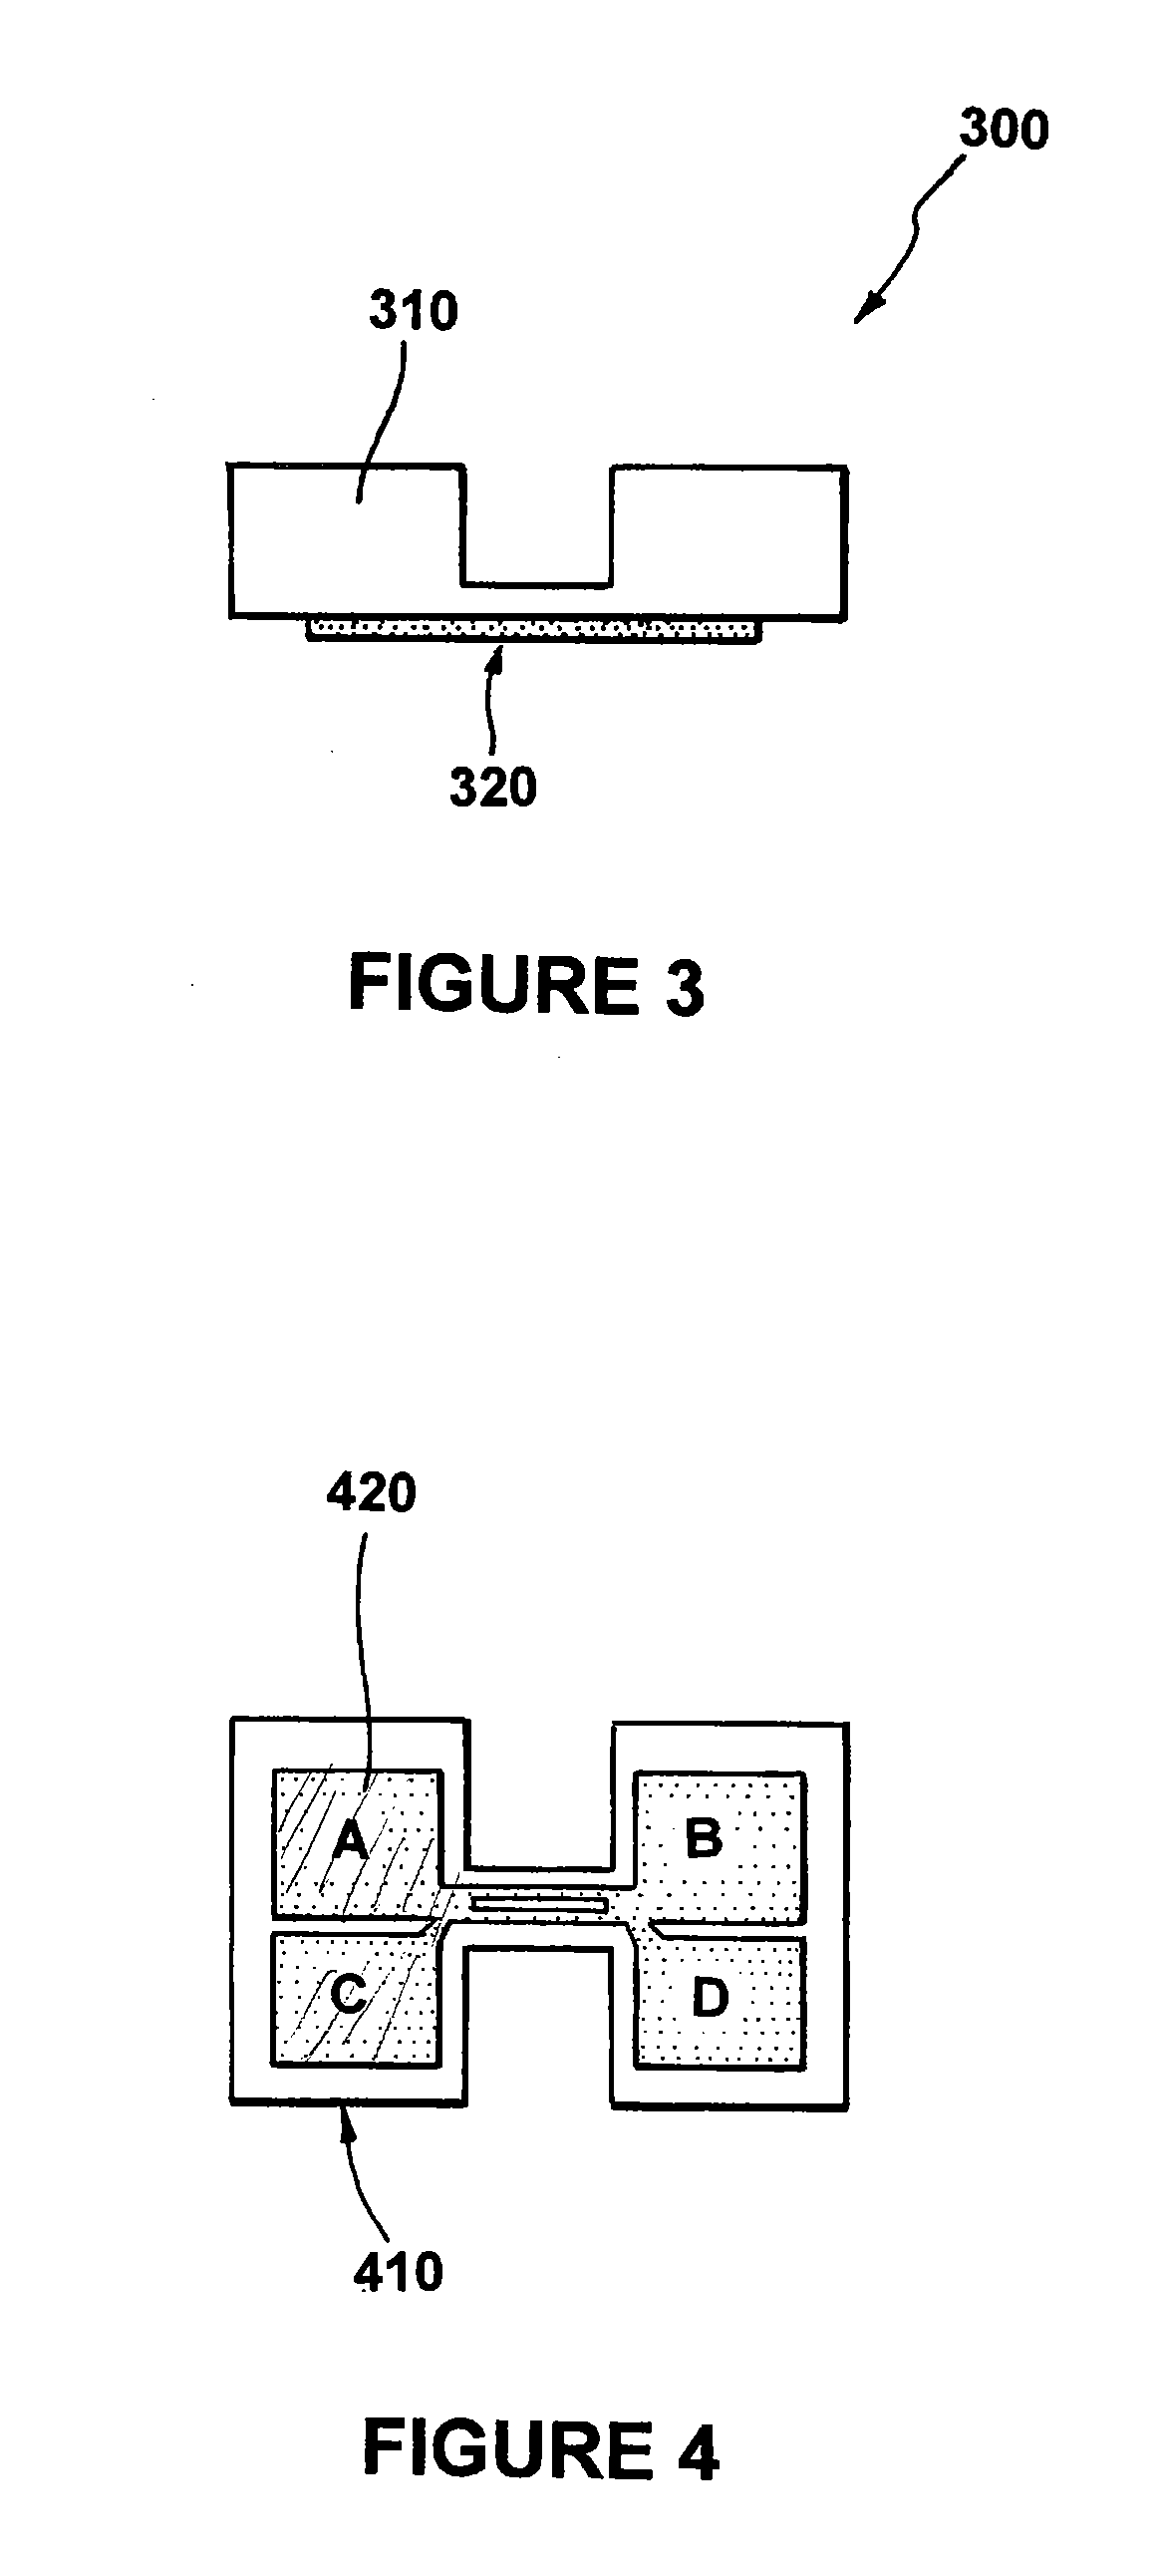 Method and apparatus for controlling the temperature of an electrically-heated discharge nozzle